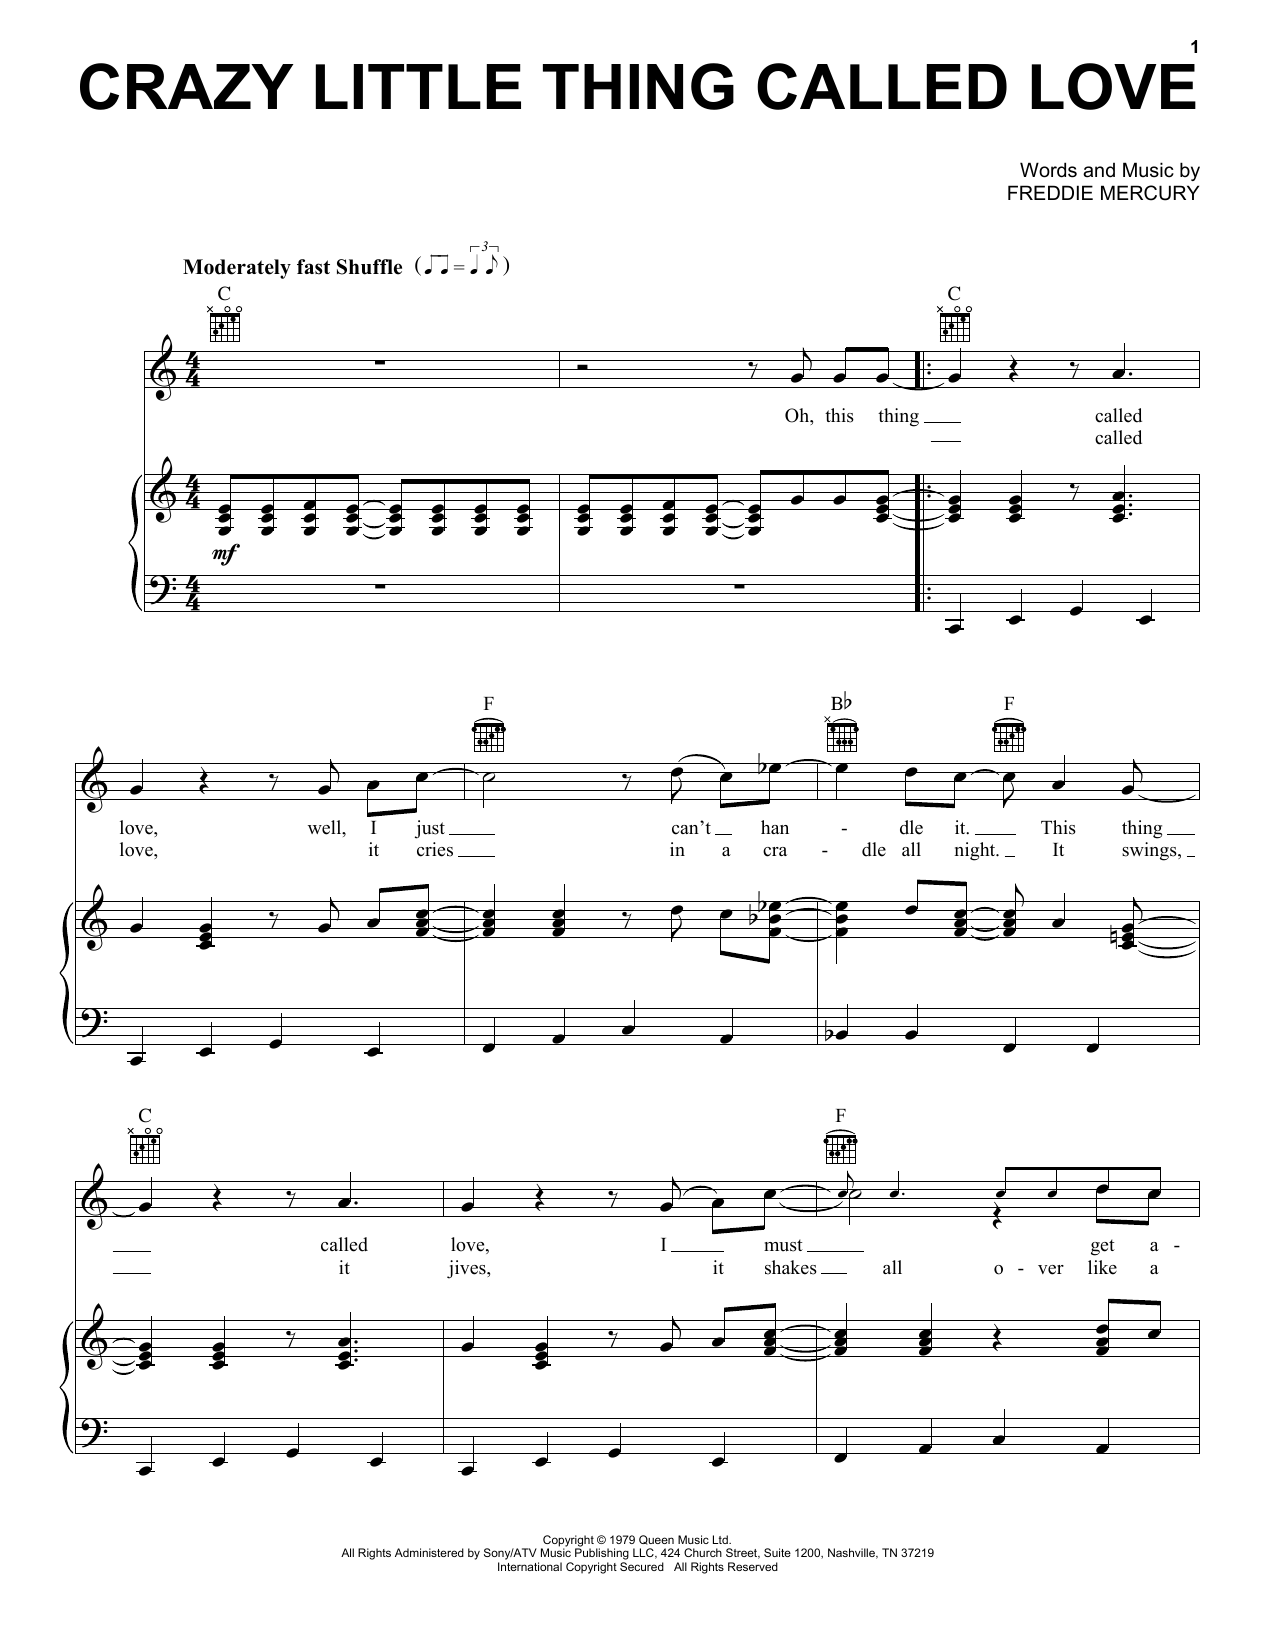 Queen Crazy Little Thing Called Love sheet music notes printable PDF score